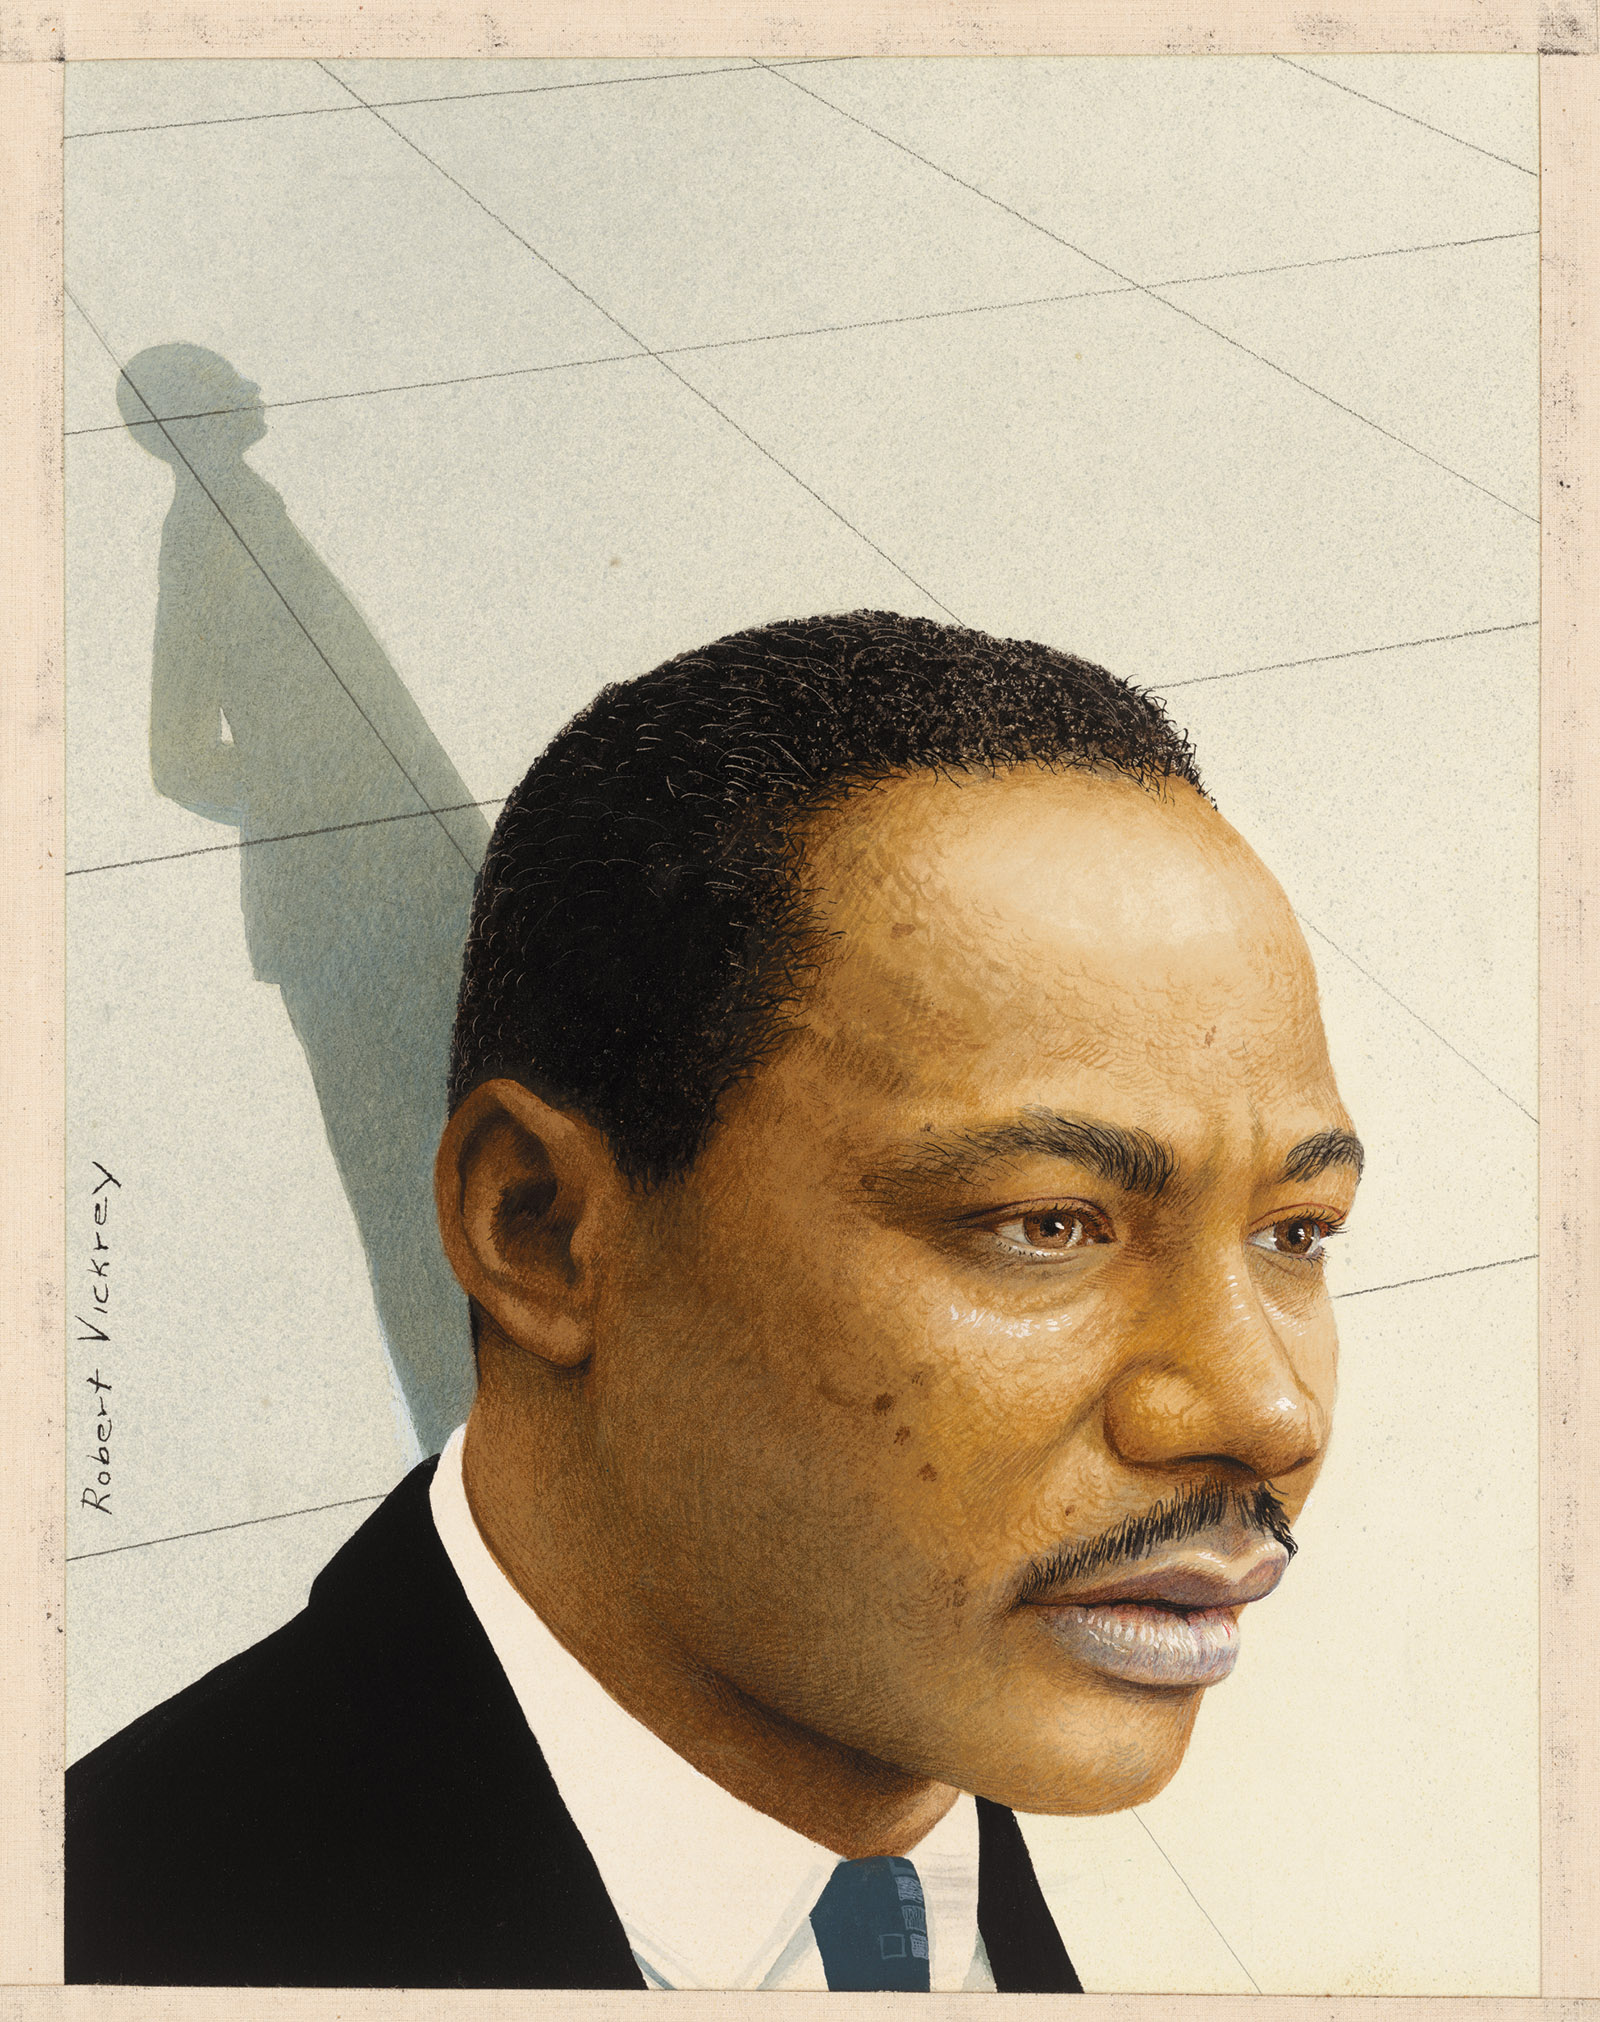 Martin Luther King Jr.; portrait by Robert Vickrey